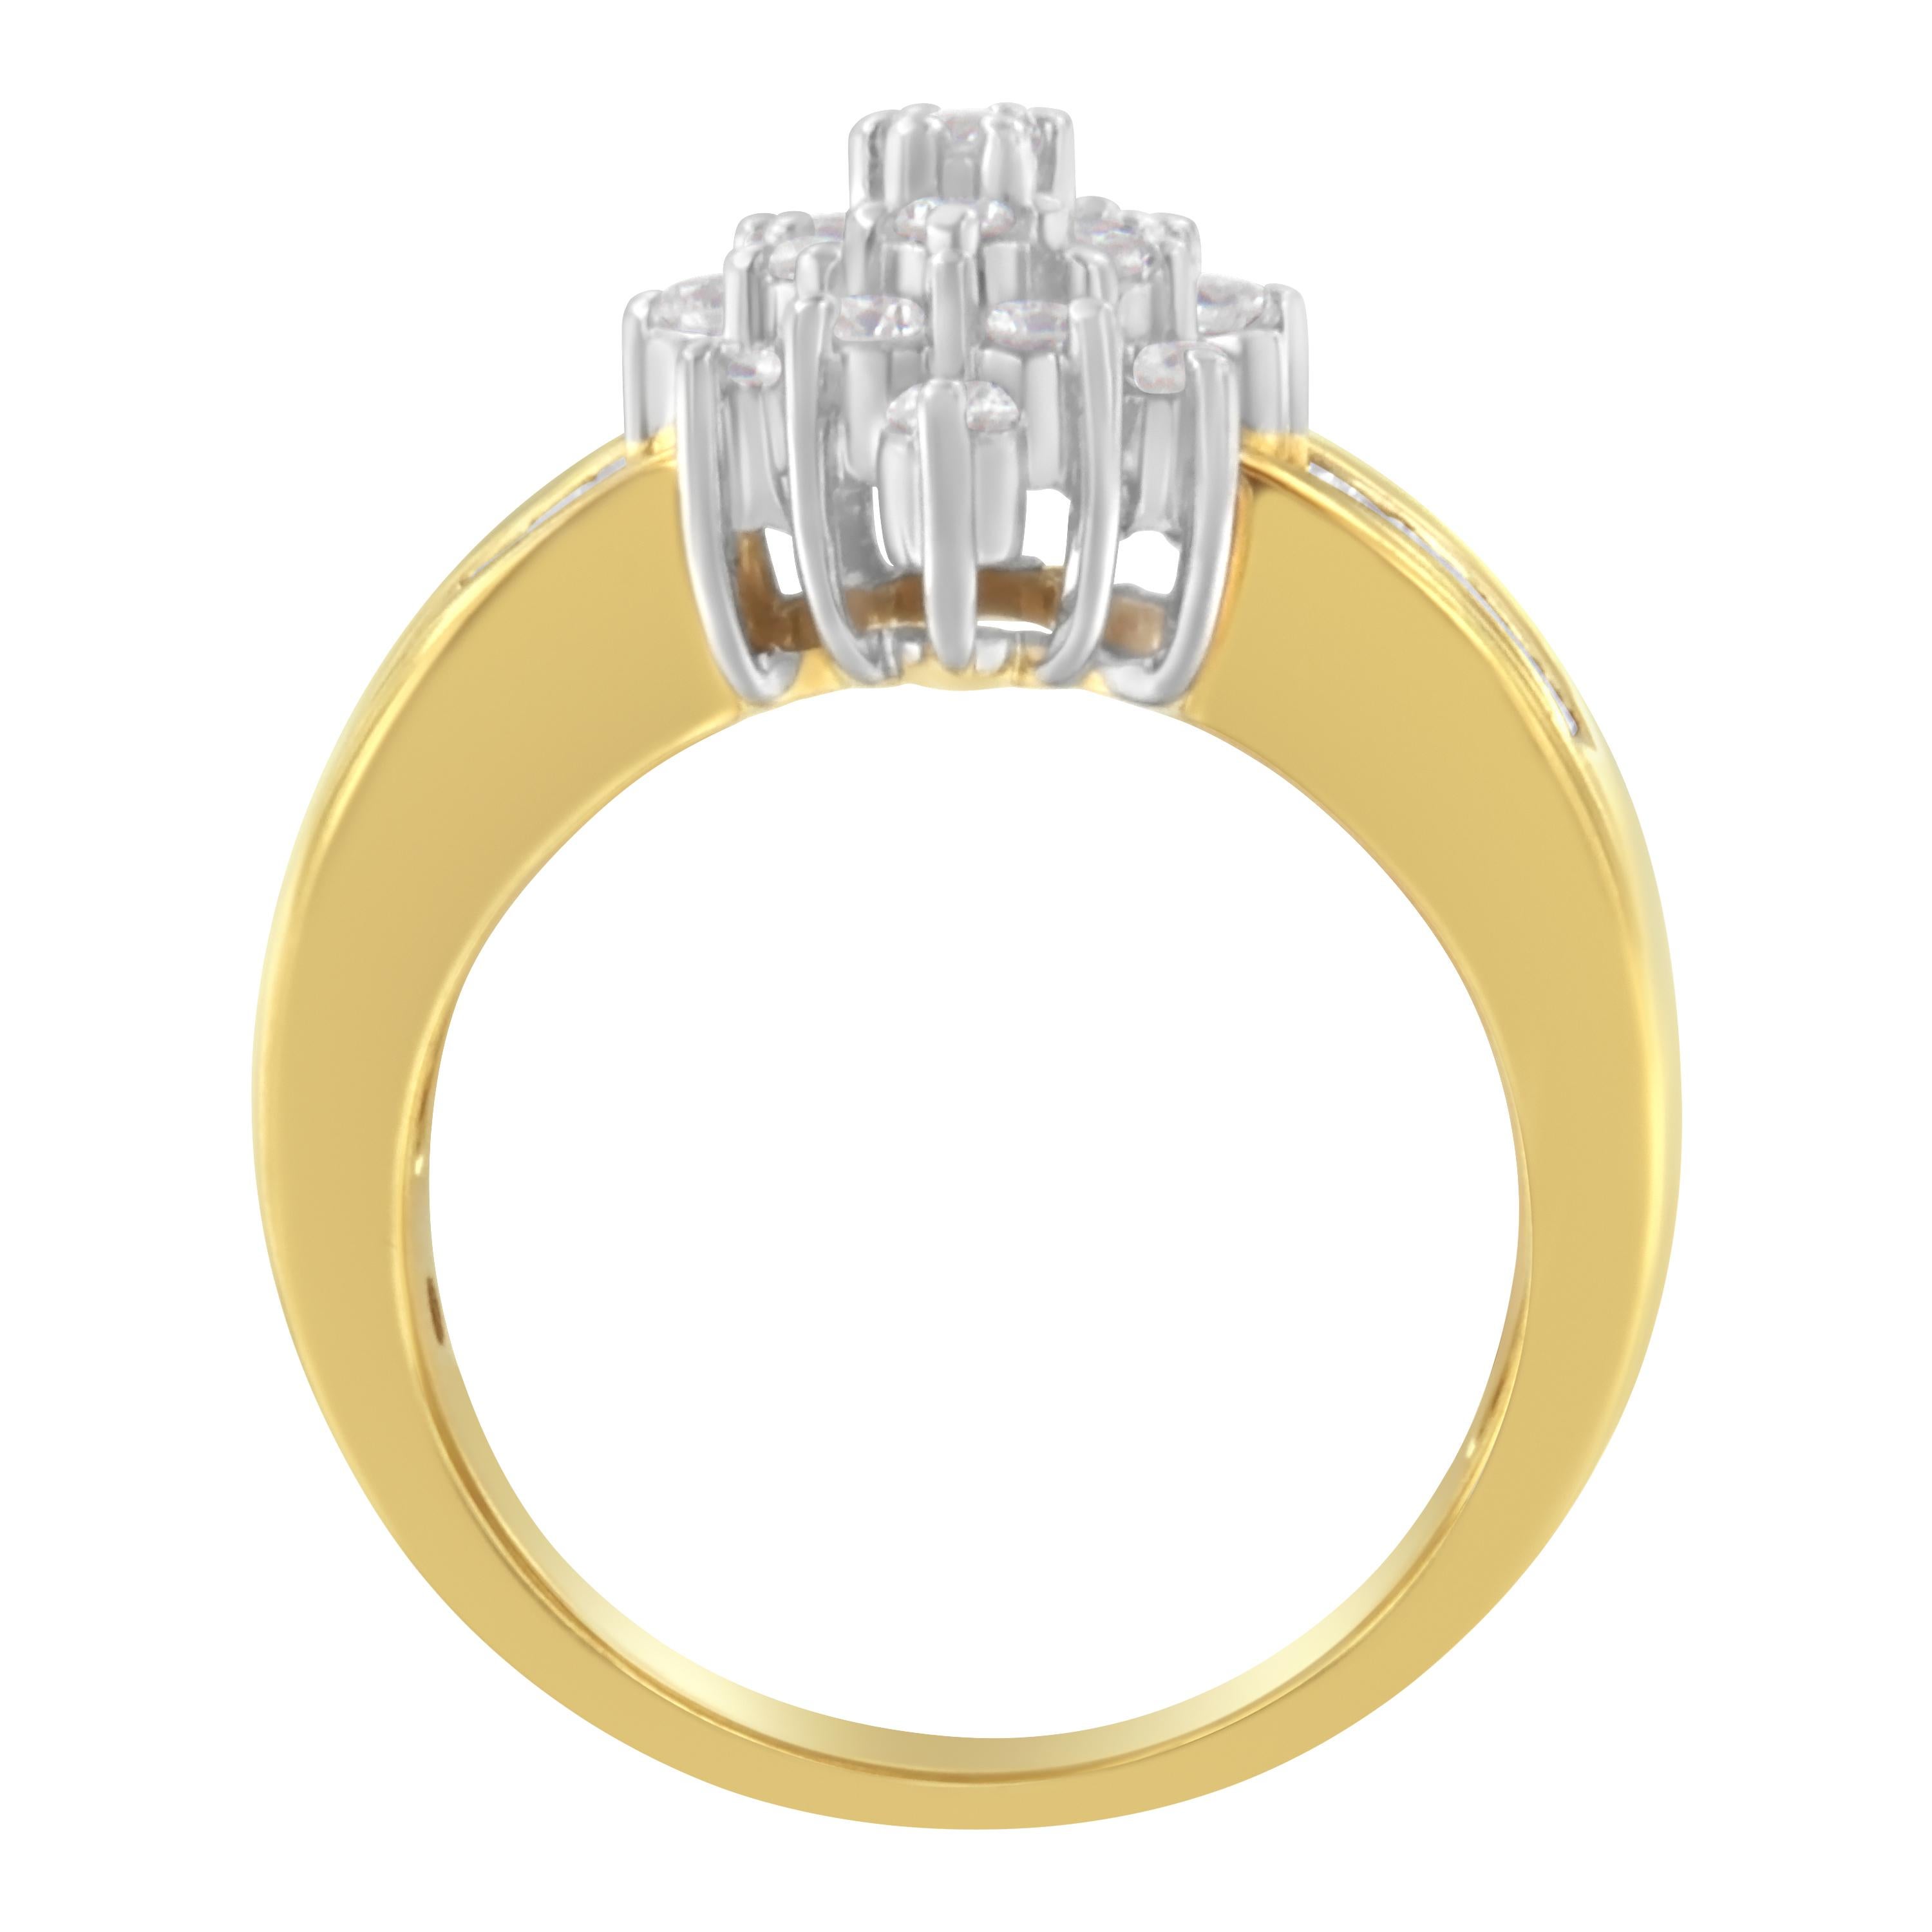 Elegant and timeless, this gorgeous 10K yellow gold diamond cocktail ring features 1.0 carat total weight of diamonds with a whopping 39 individual stones. The fashion ring features a raised, multi-tier starburst shaped cluster made up of round